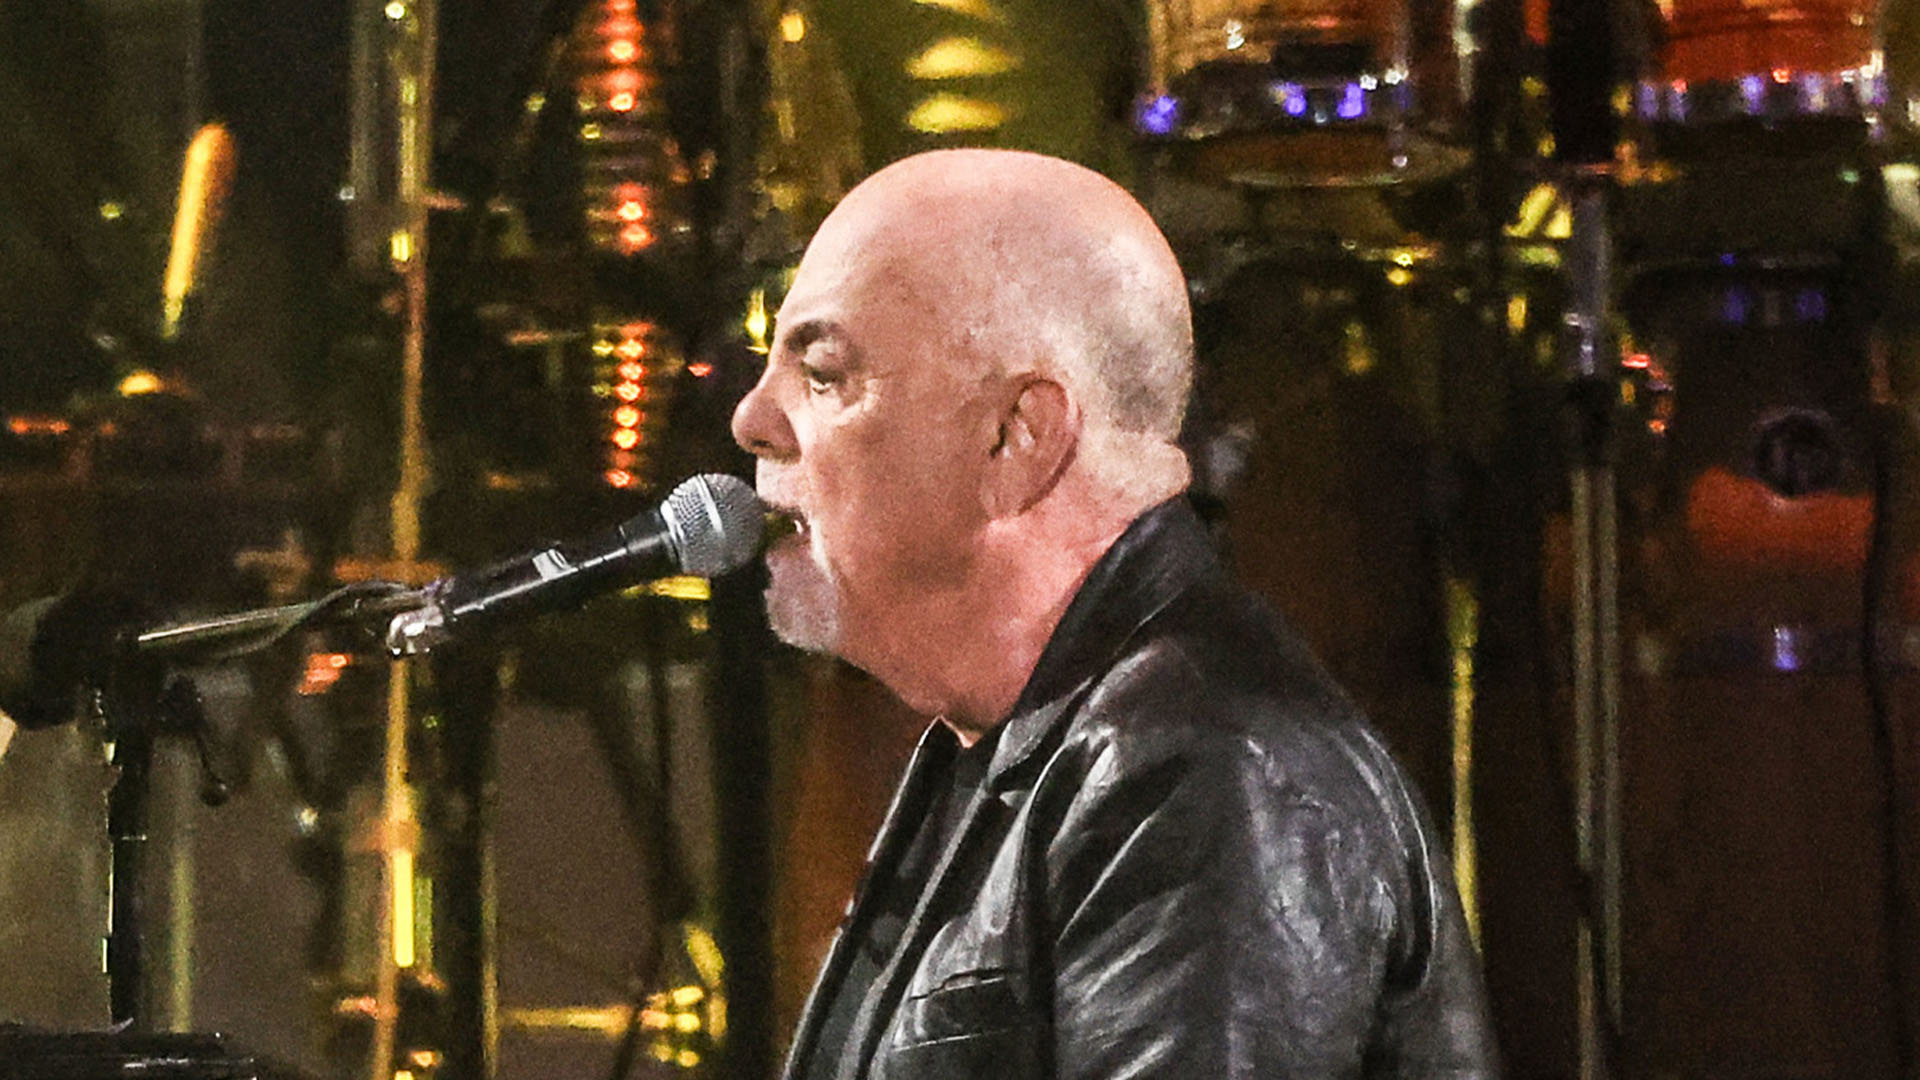 Legendary Billy Joel serenades ex-wife Christie Brinkley with Uptown Girl at MSG – fans declare him the ultimate ‘GOAT’ singer!